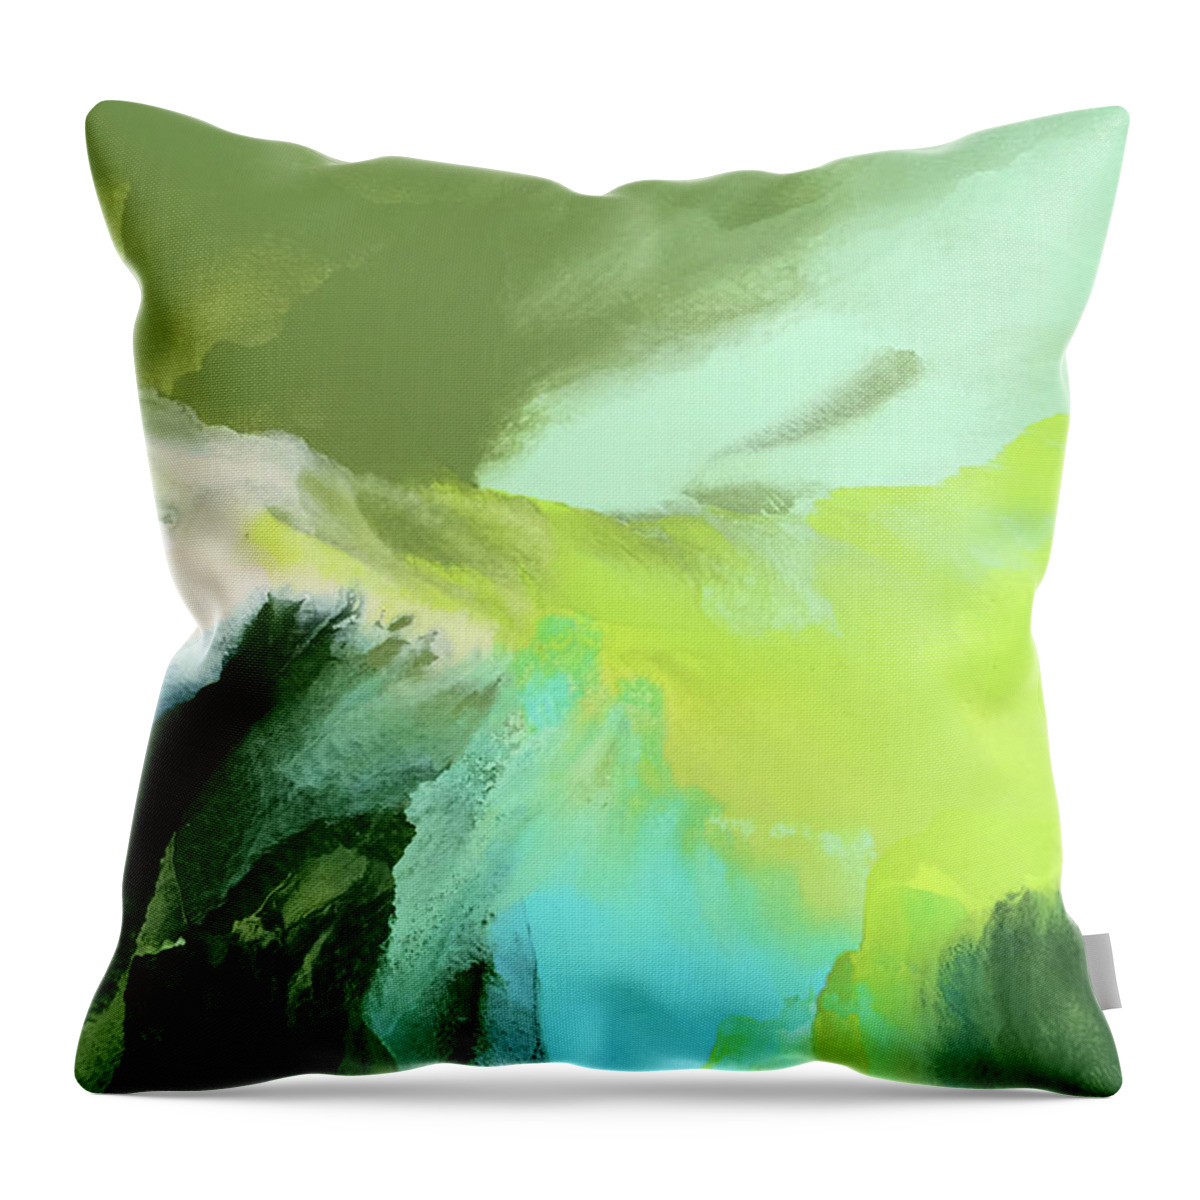 Fluid Throw Pillow featuring the painting Abundant by Linda Bailey